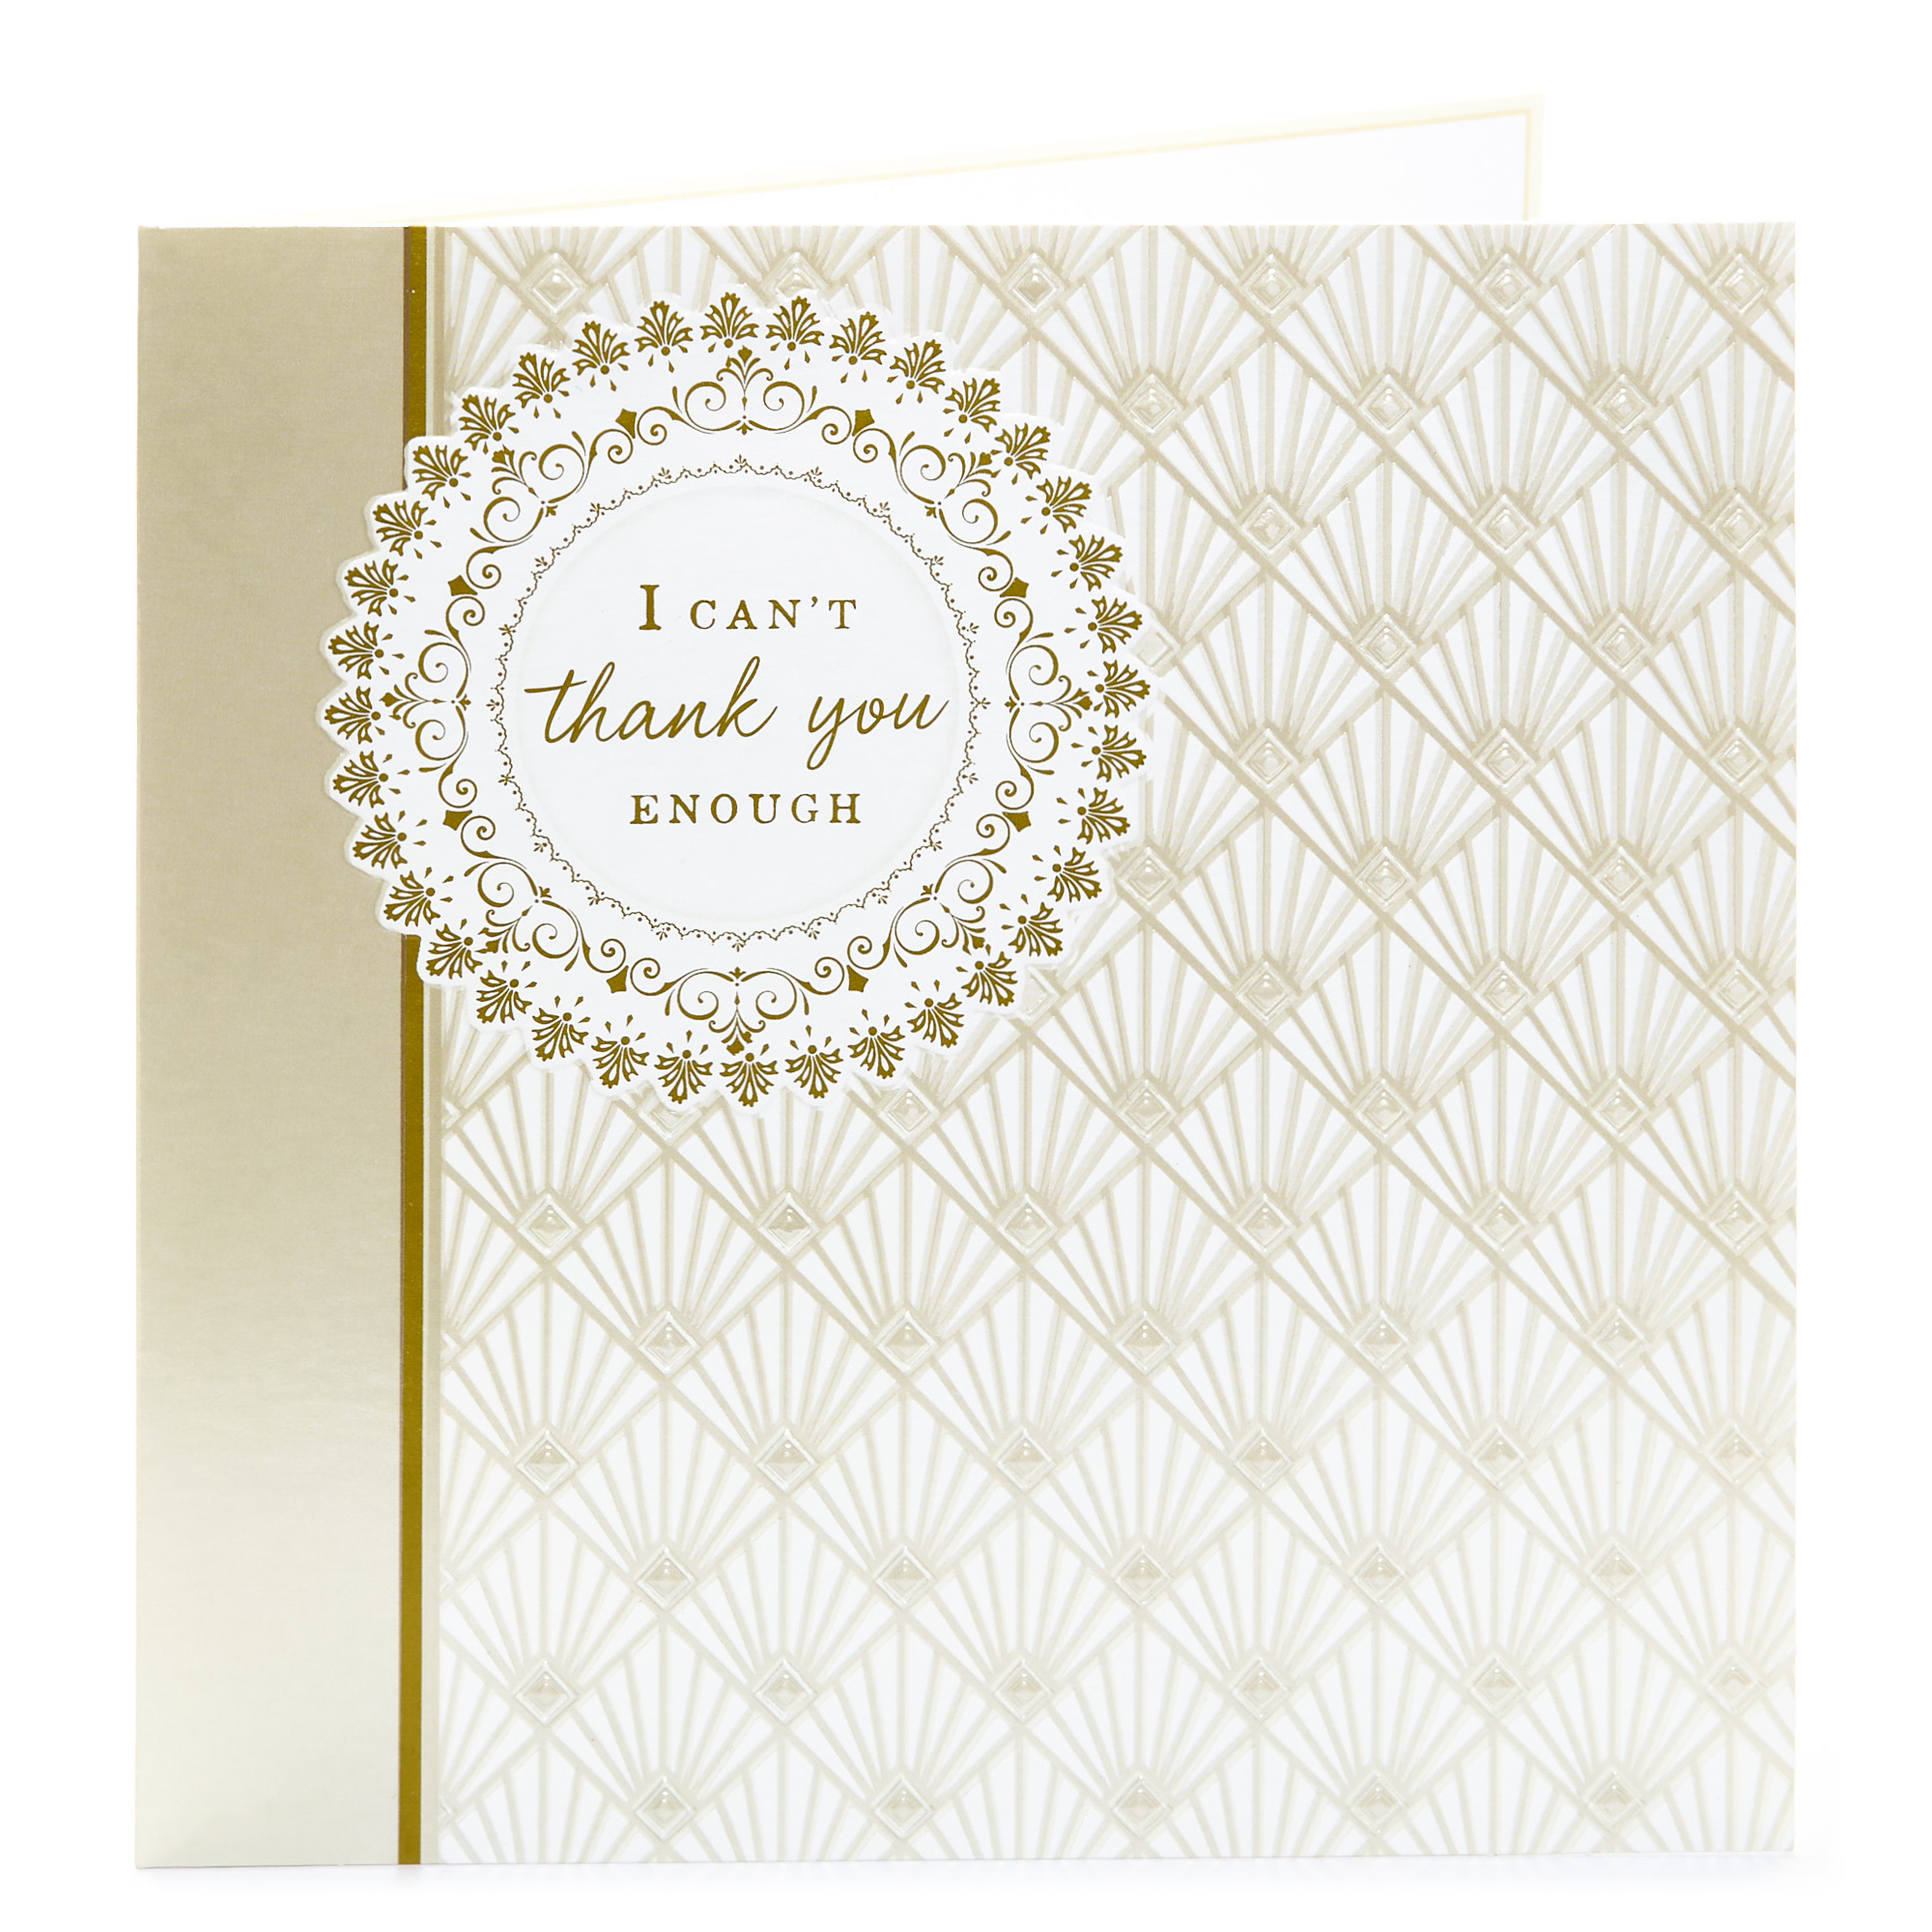 Thank You Card - I Can't Thank You Enough